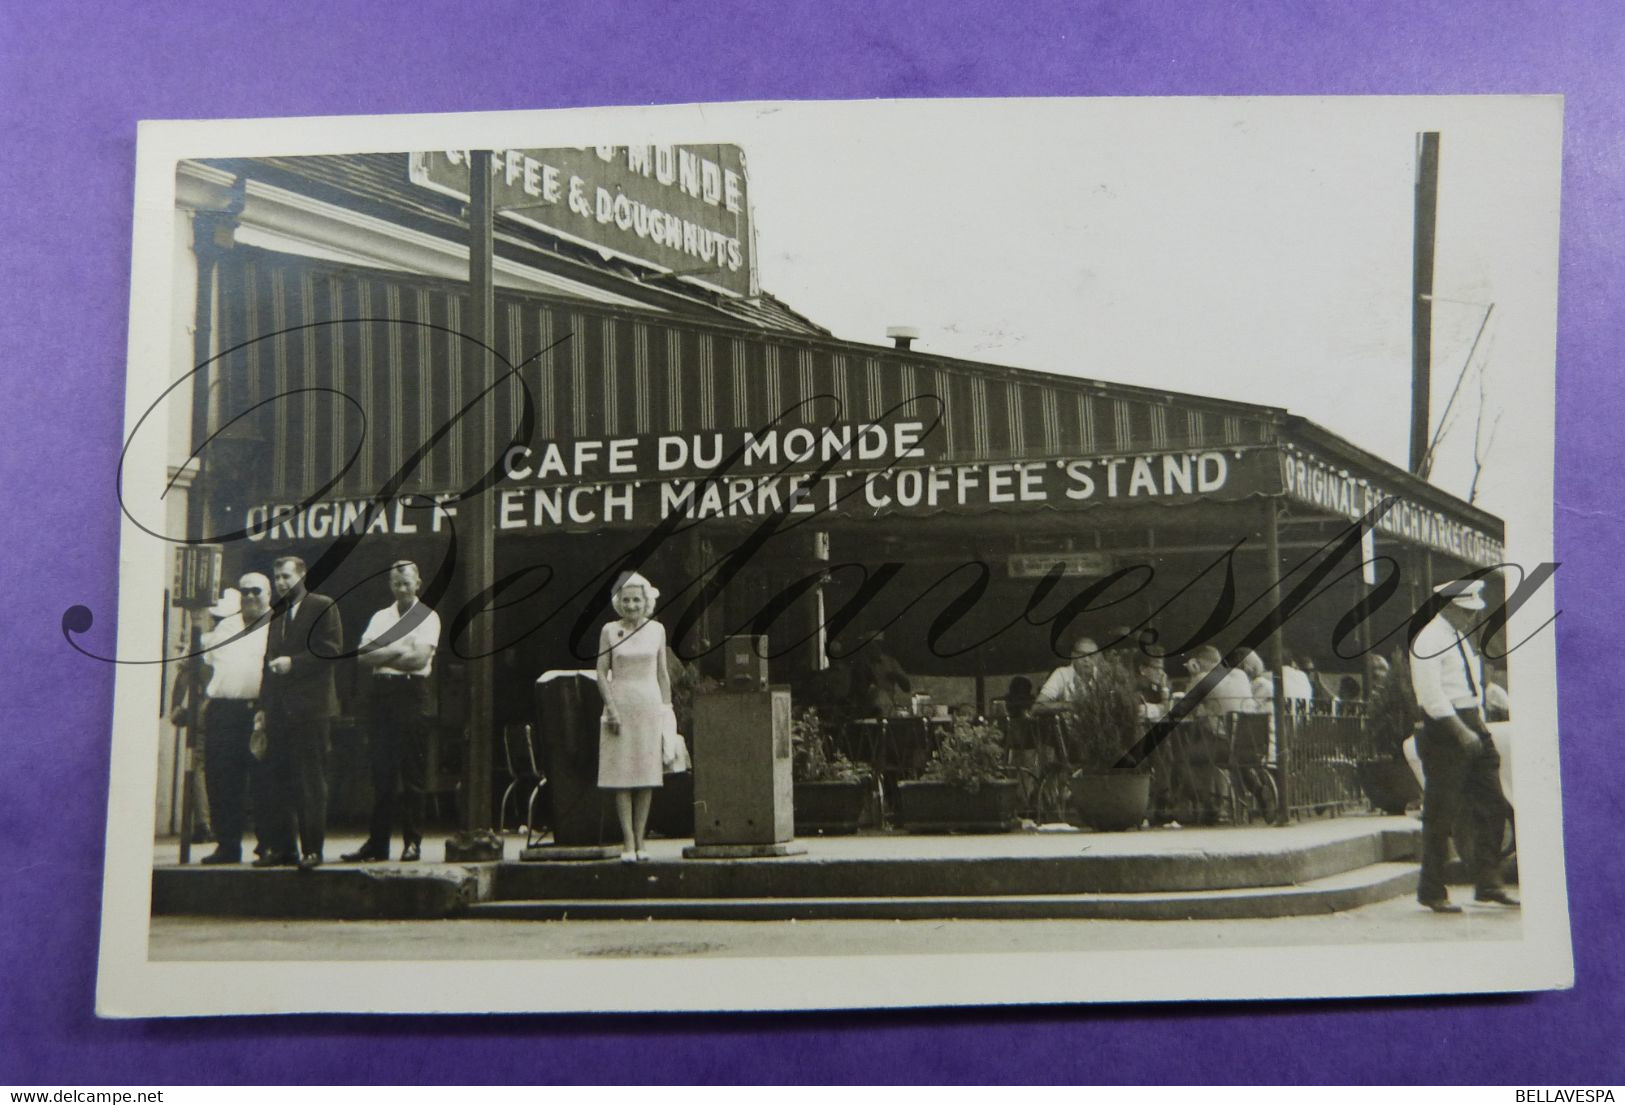 New Orleans Louisiana Cafe Du Monde -Original French Market Coffee - New Orleans